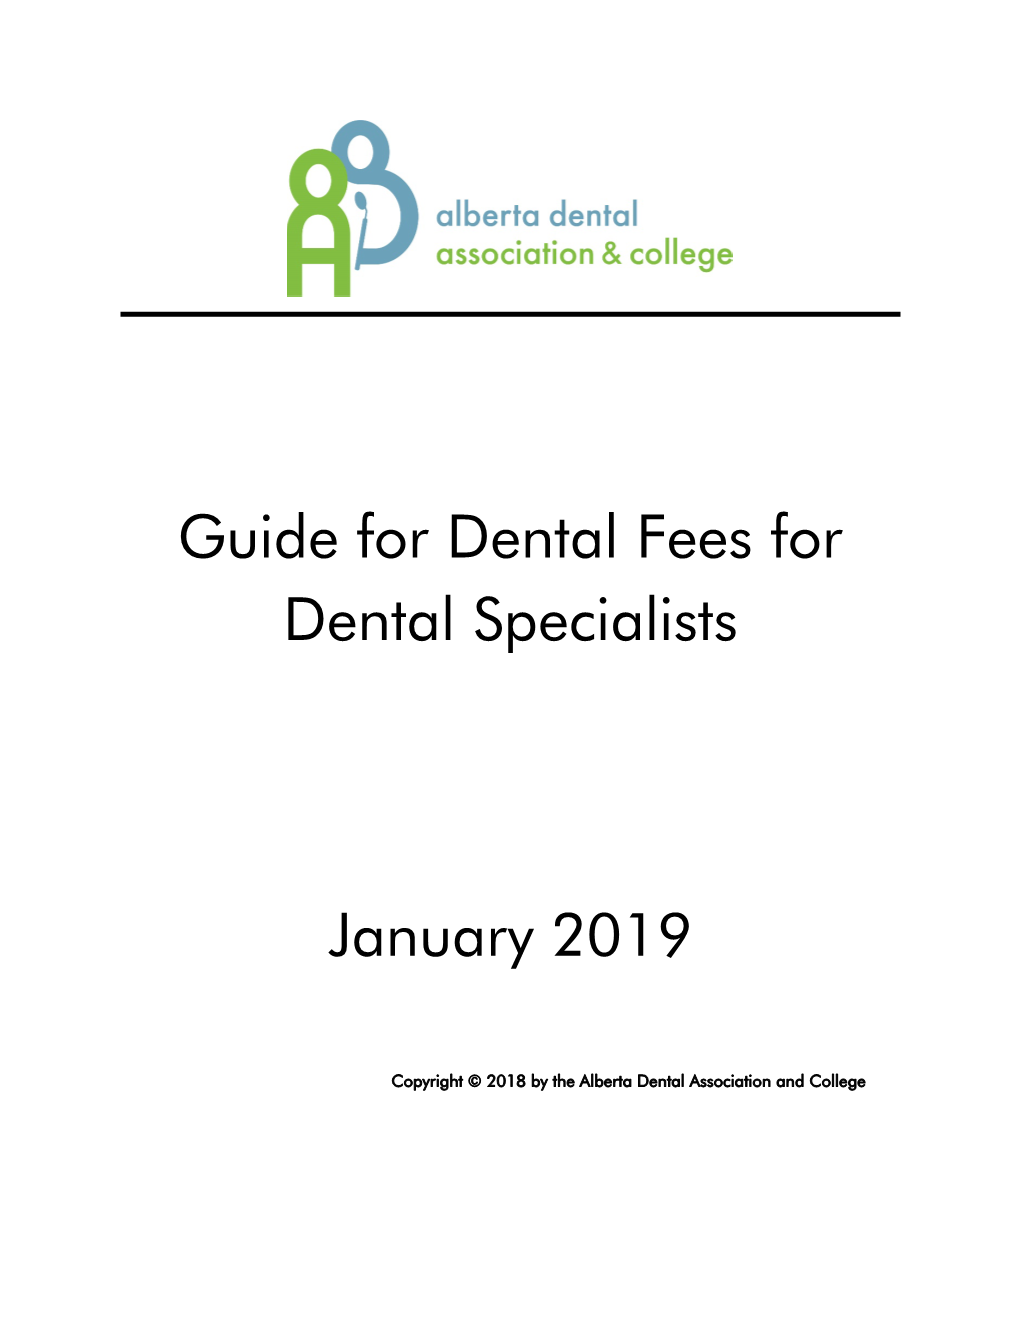 Guide for Dental Fees for Dental Specialists January 2019